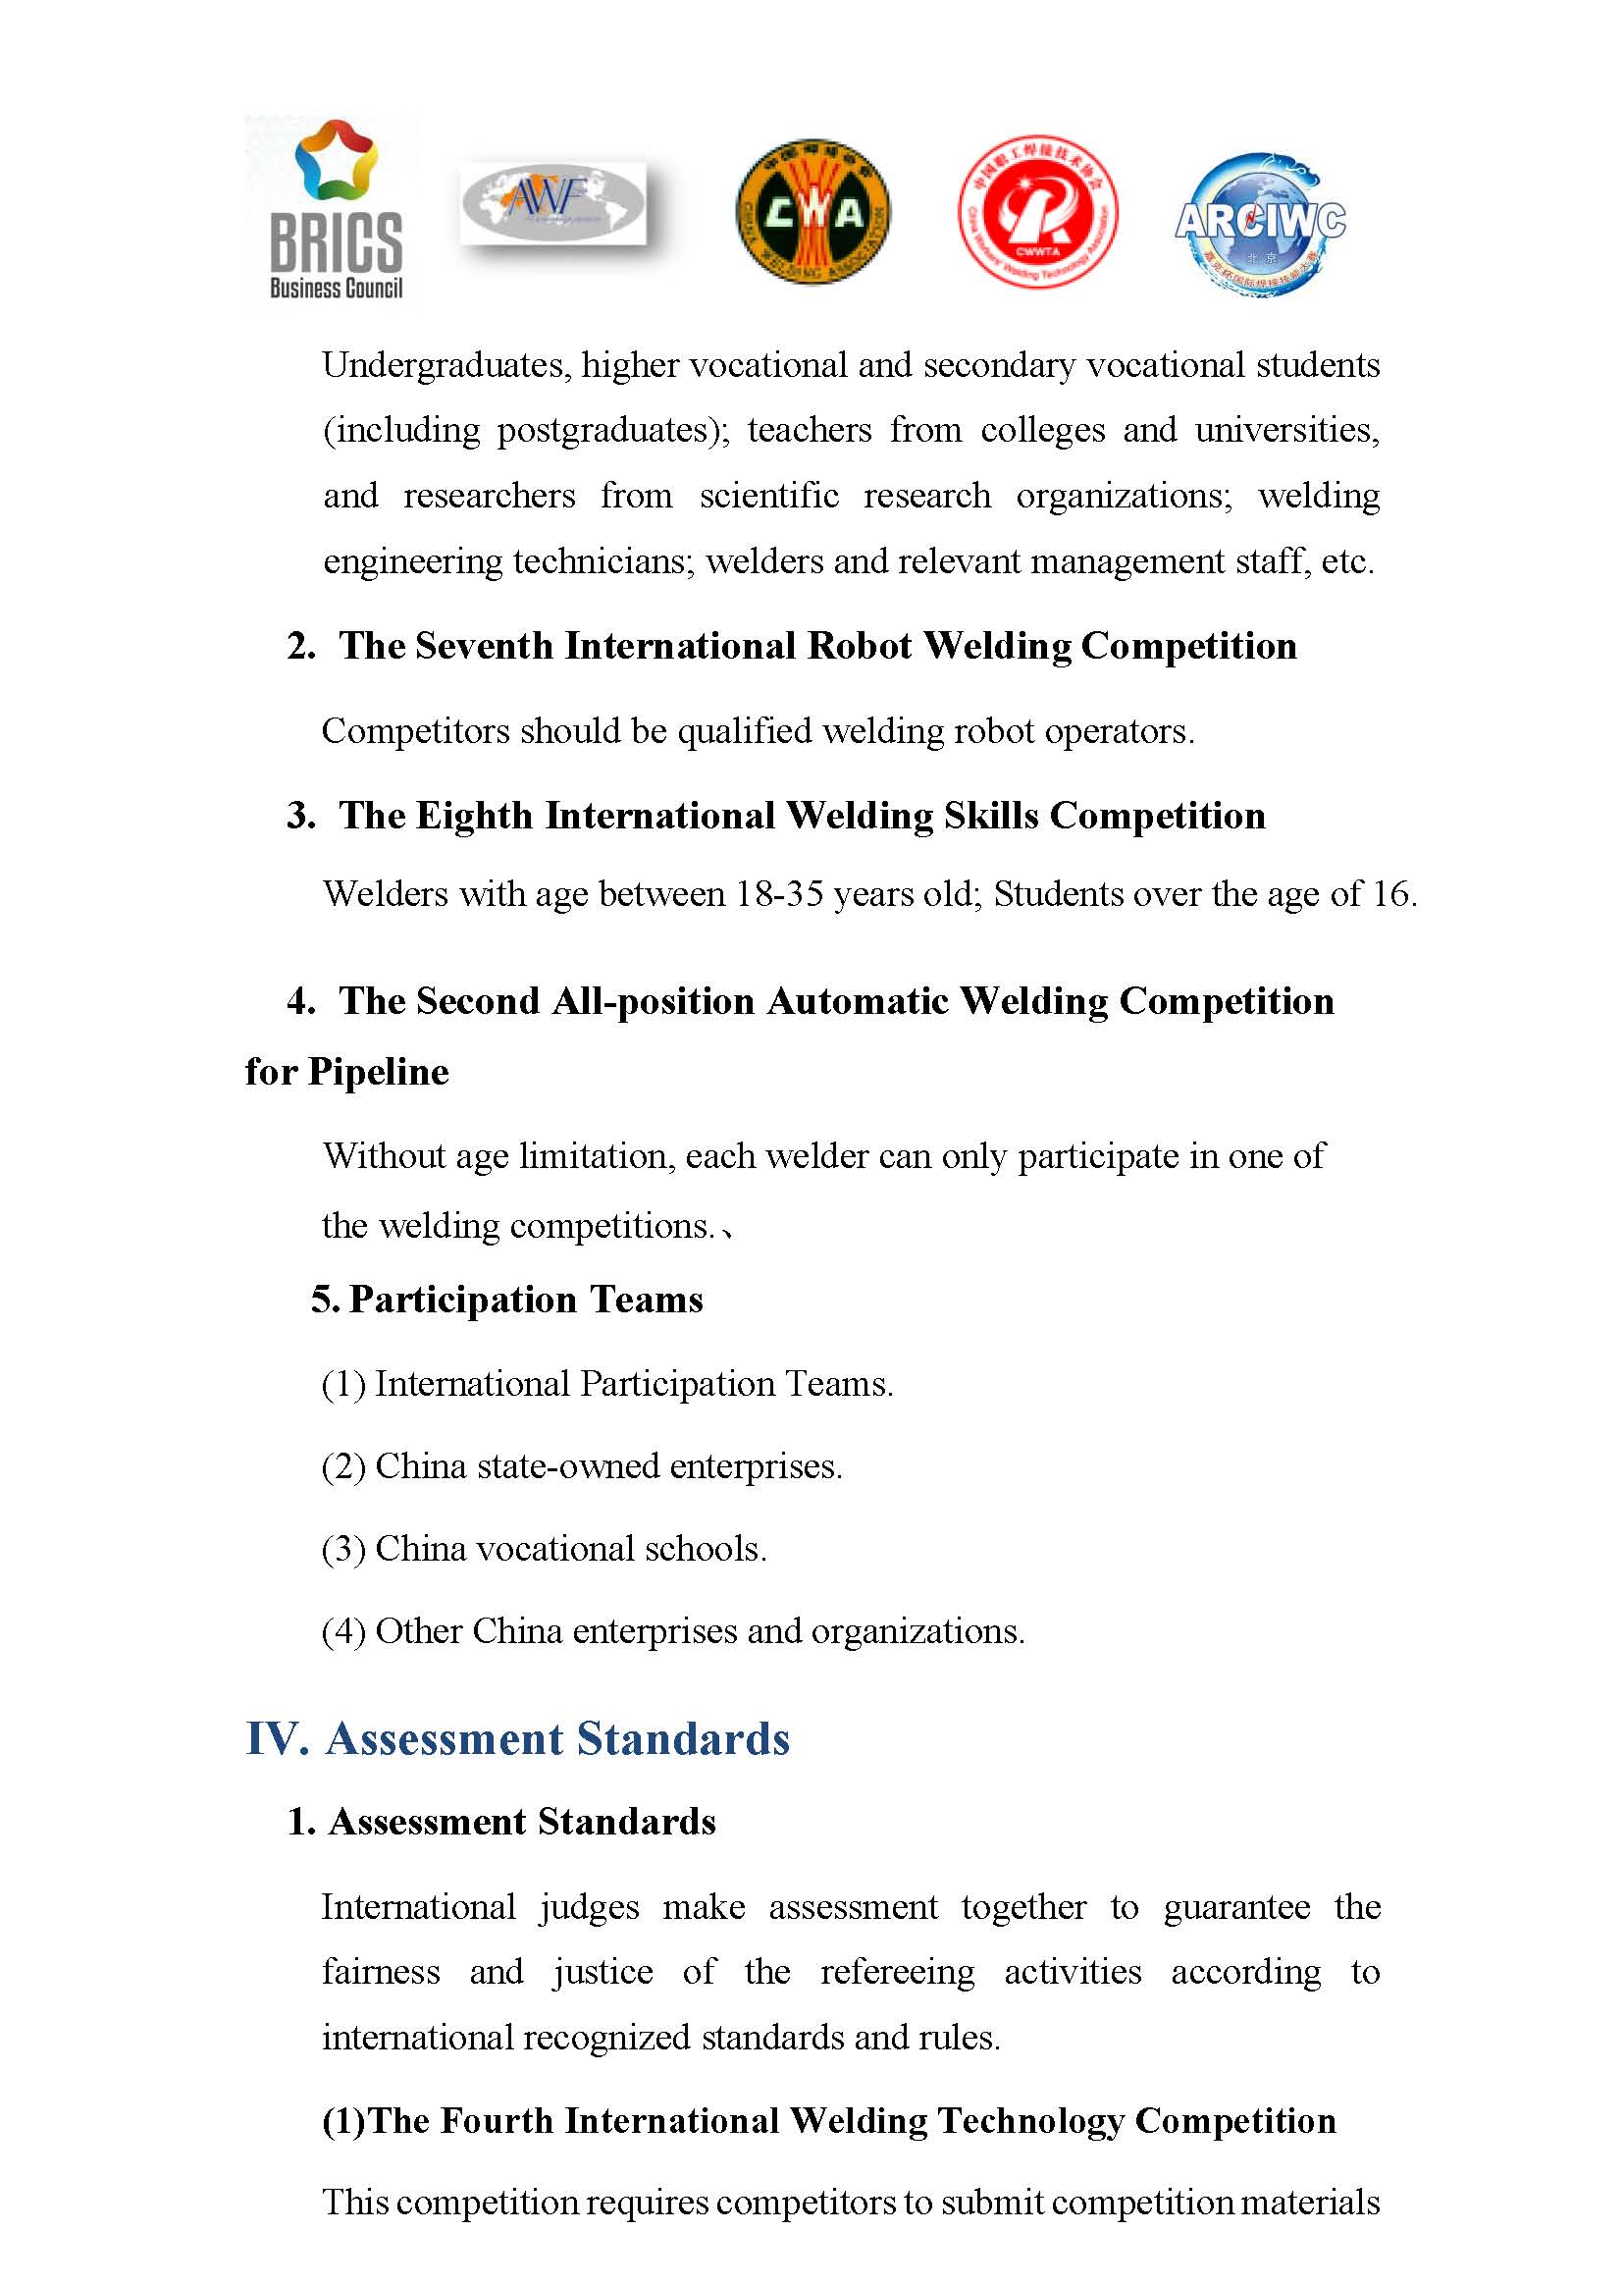 2020 Arc Cup International Welding Competition Invitation 4